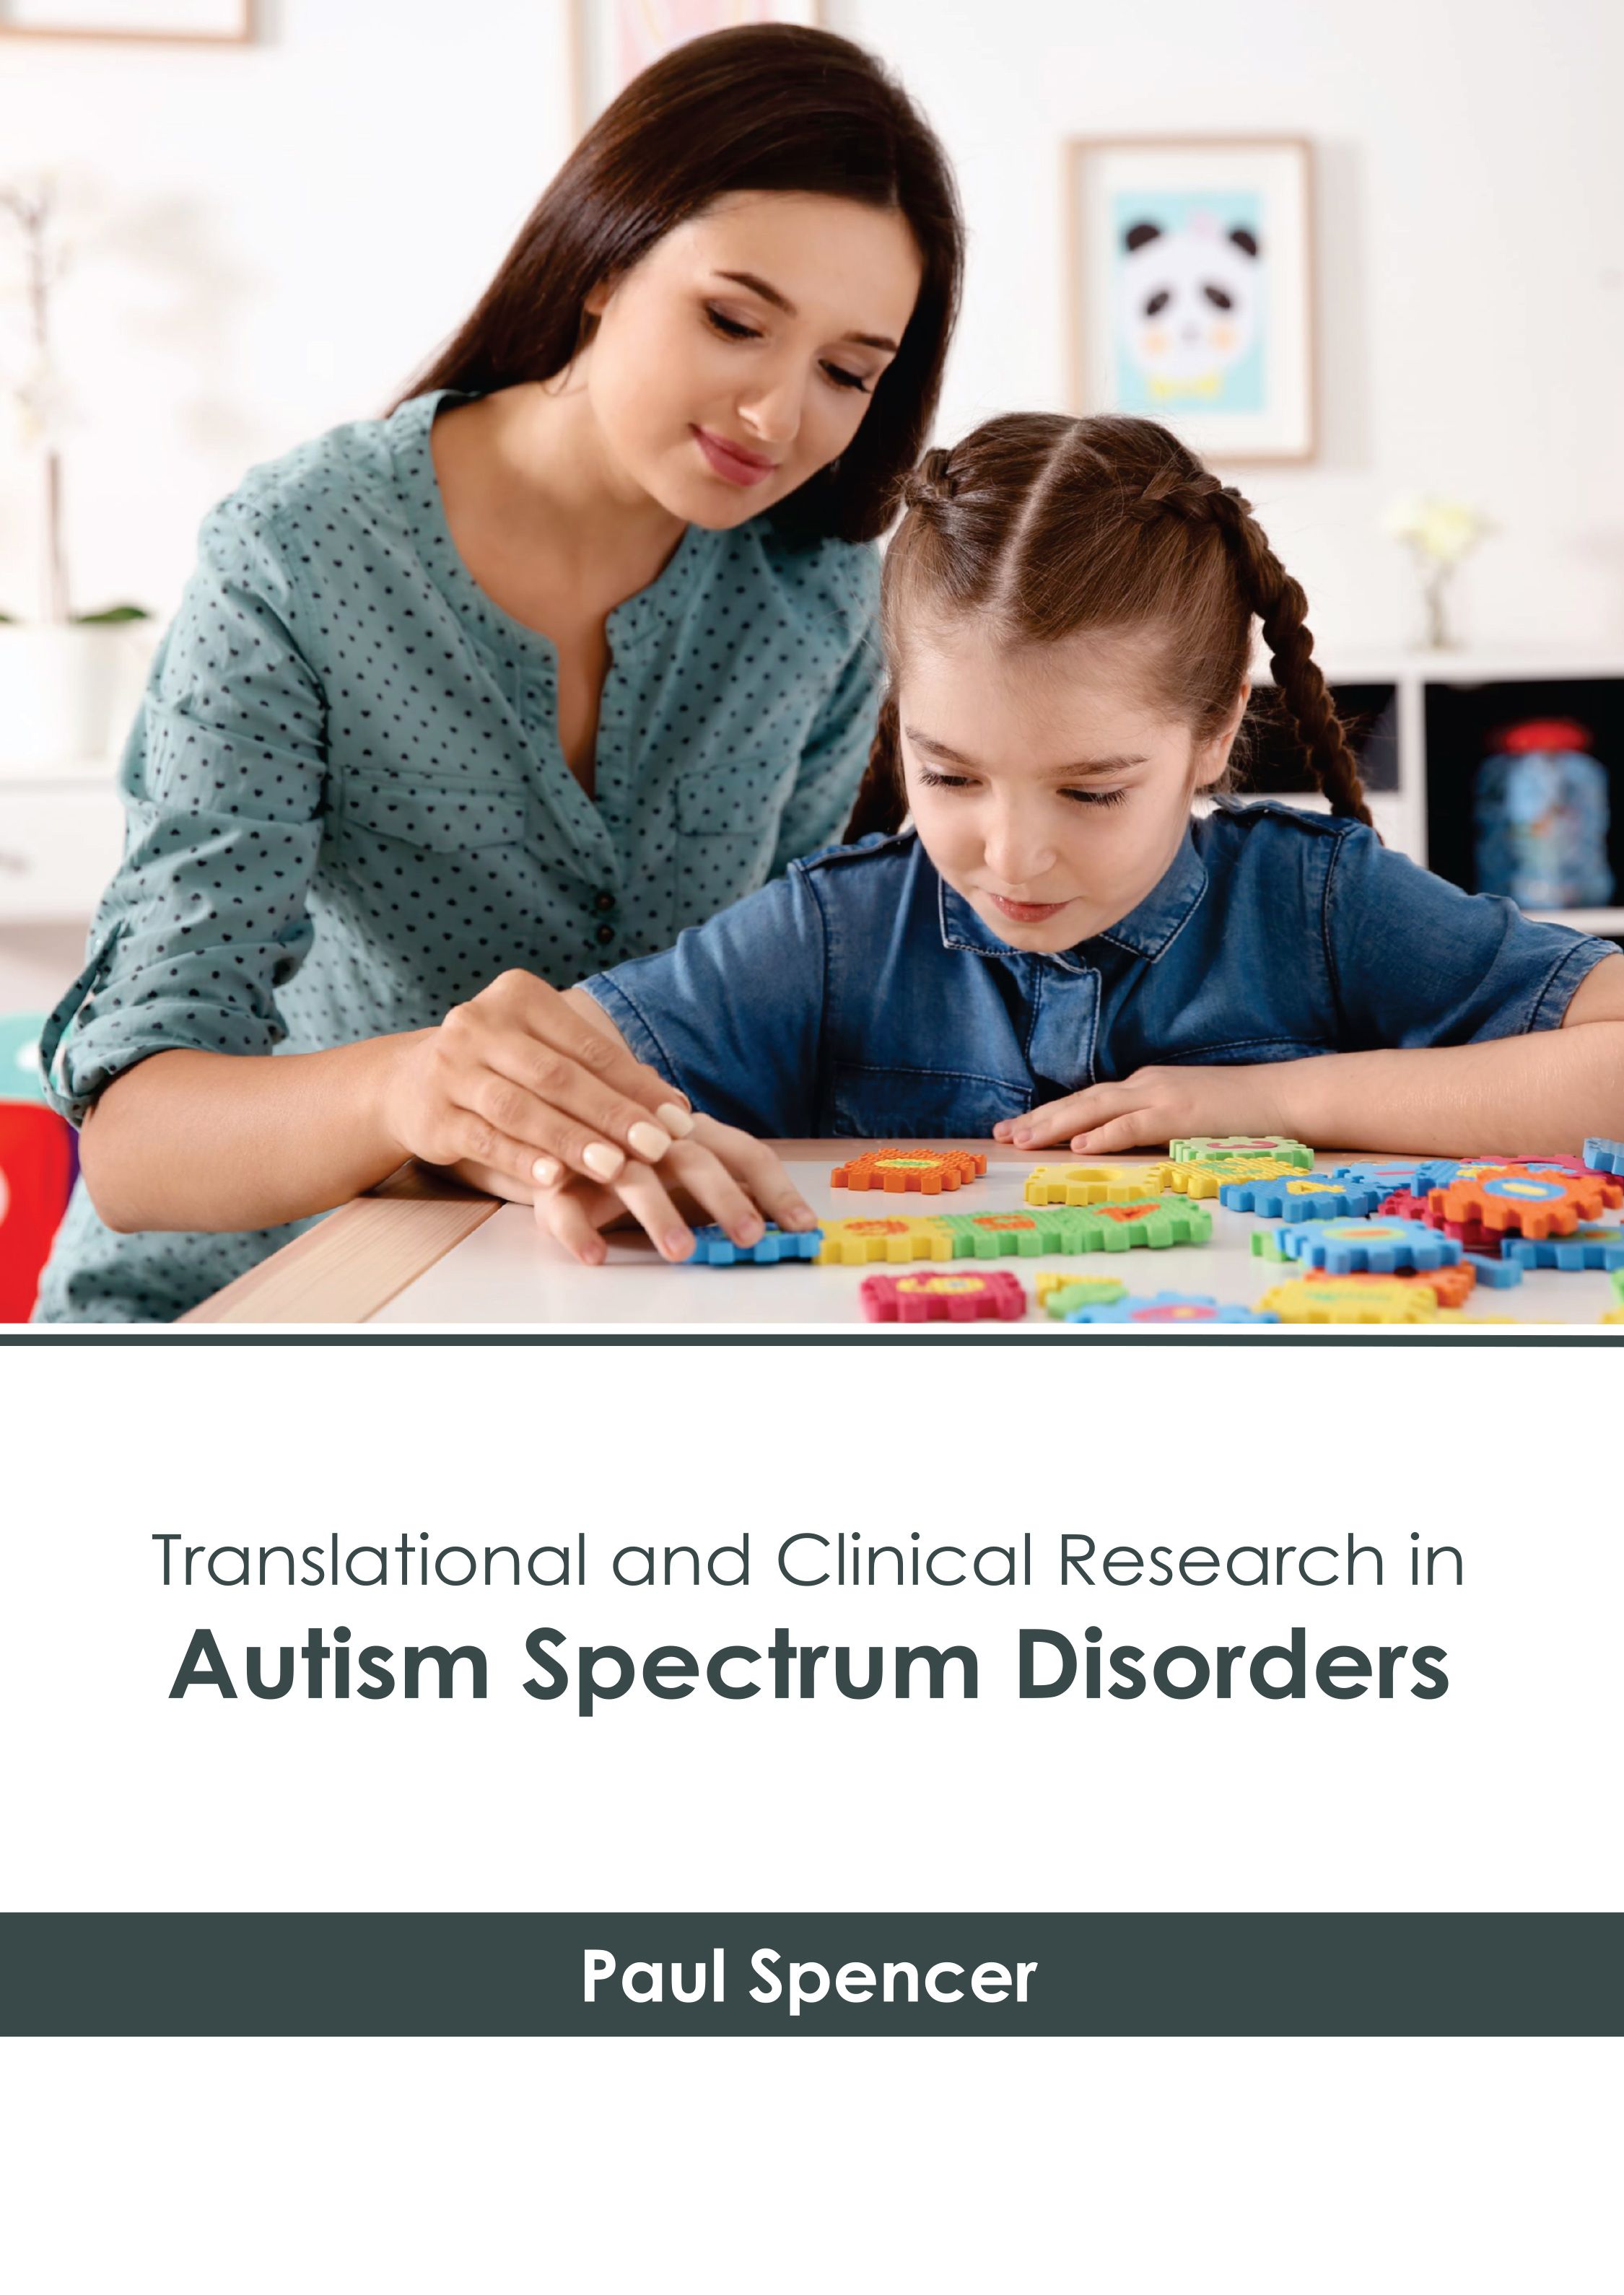 TRANSLATIONAL AND CLINICAL RESEARCH IN AUTISM SPECTRUM DISORDERS